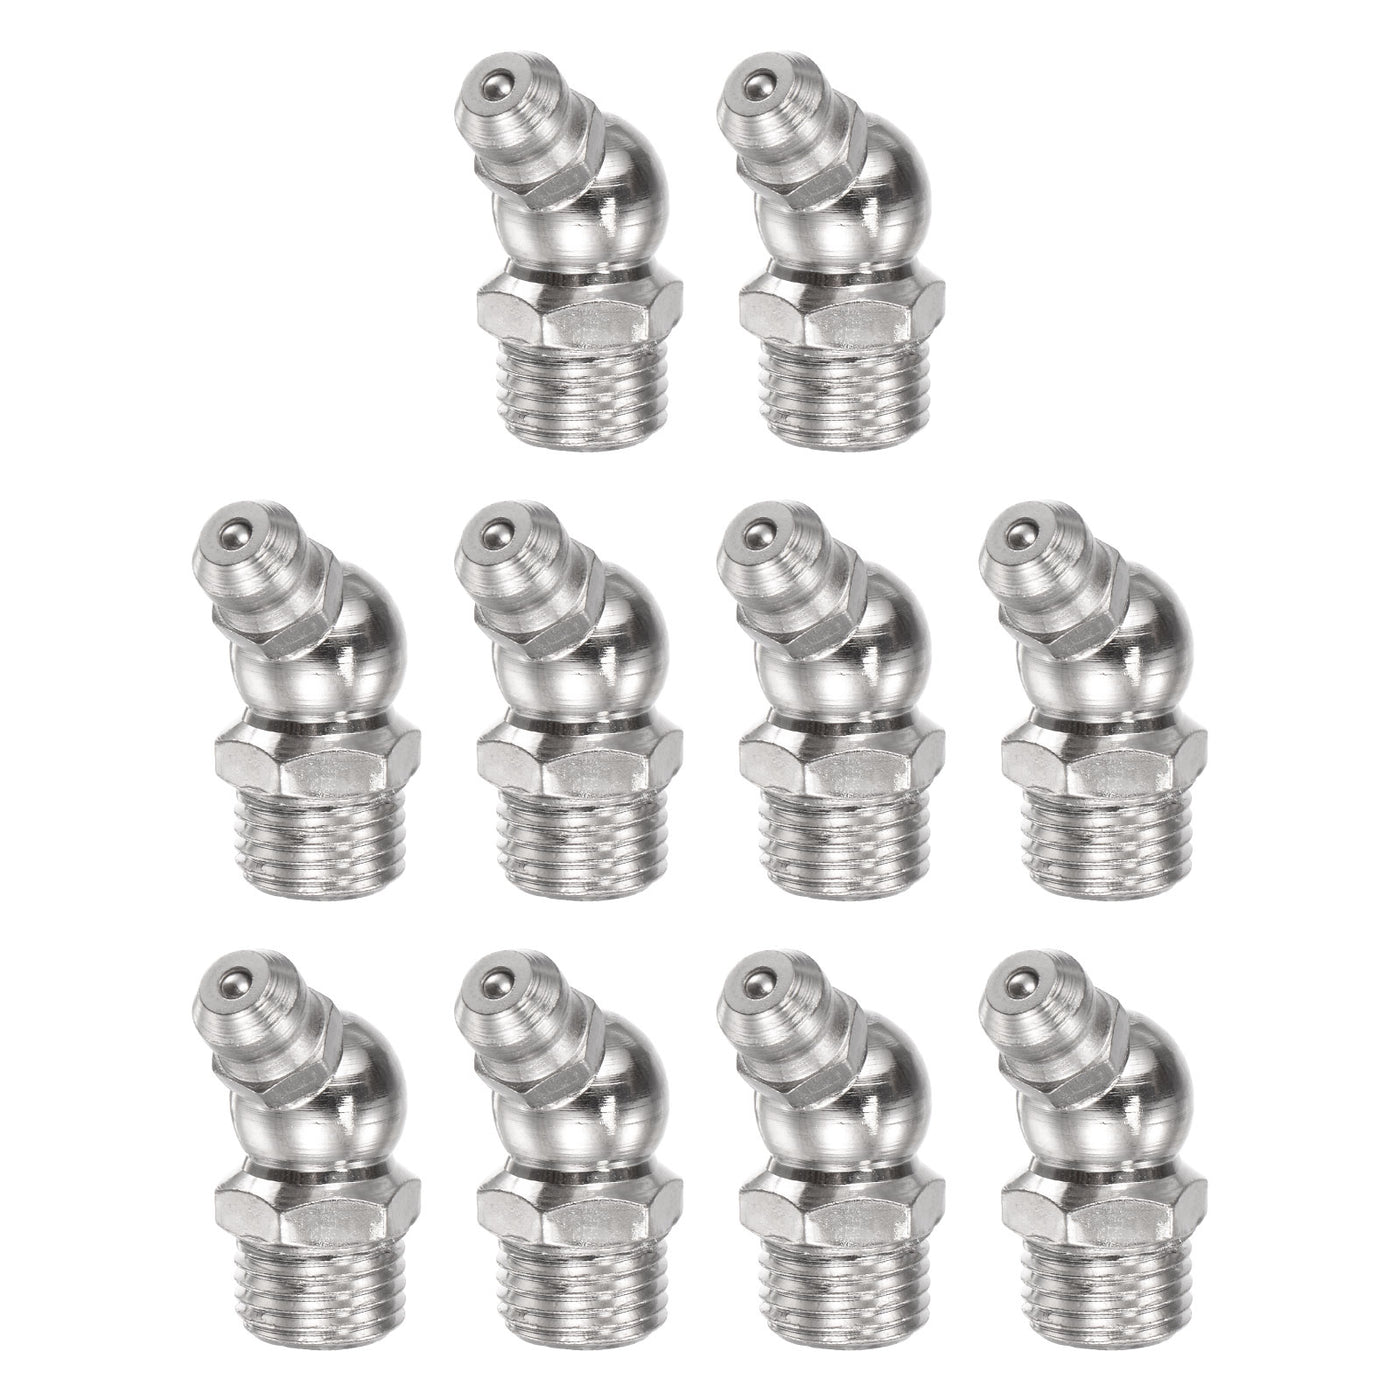 Uxcell Uxcell Nickel-Plated Iron 45 Degree Hydraulic Grease Fitting M10 x 1mm Thread, 20Pcs